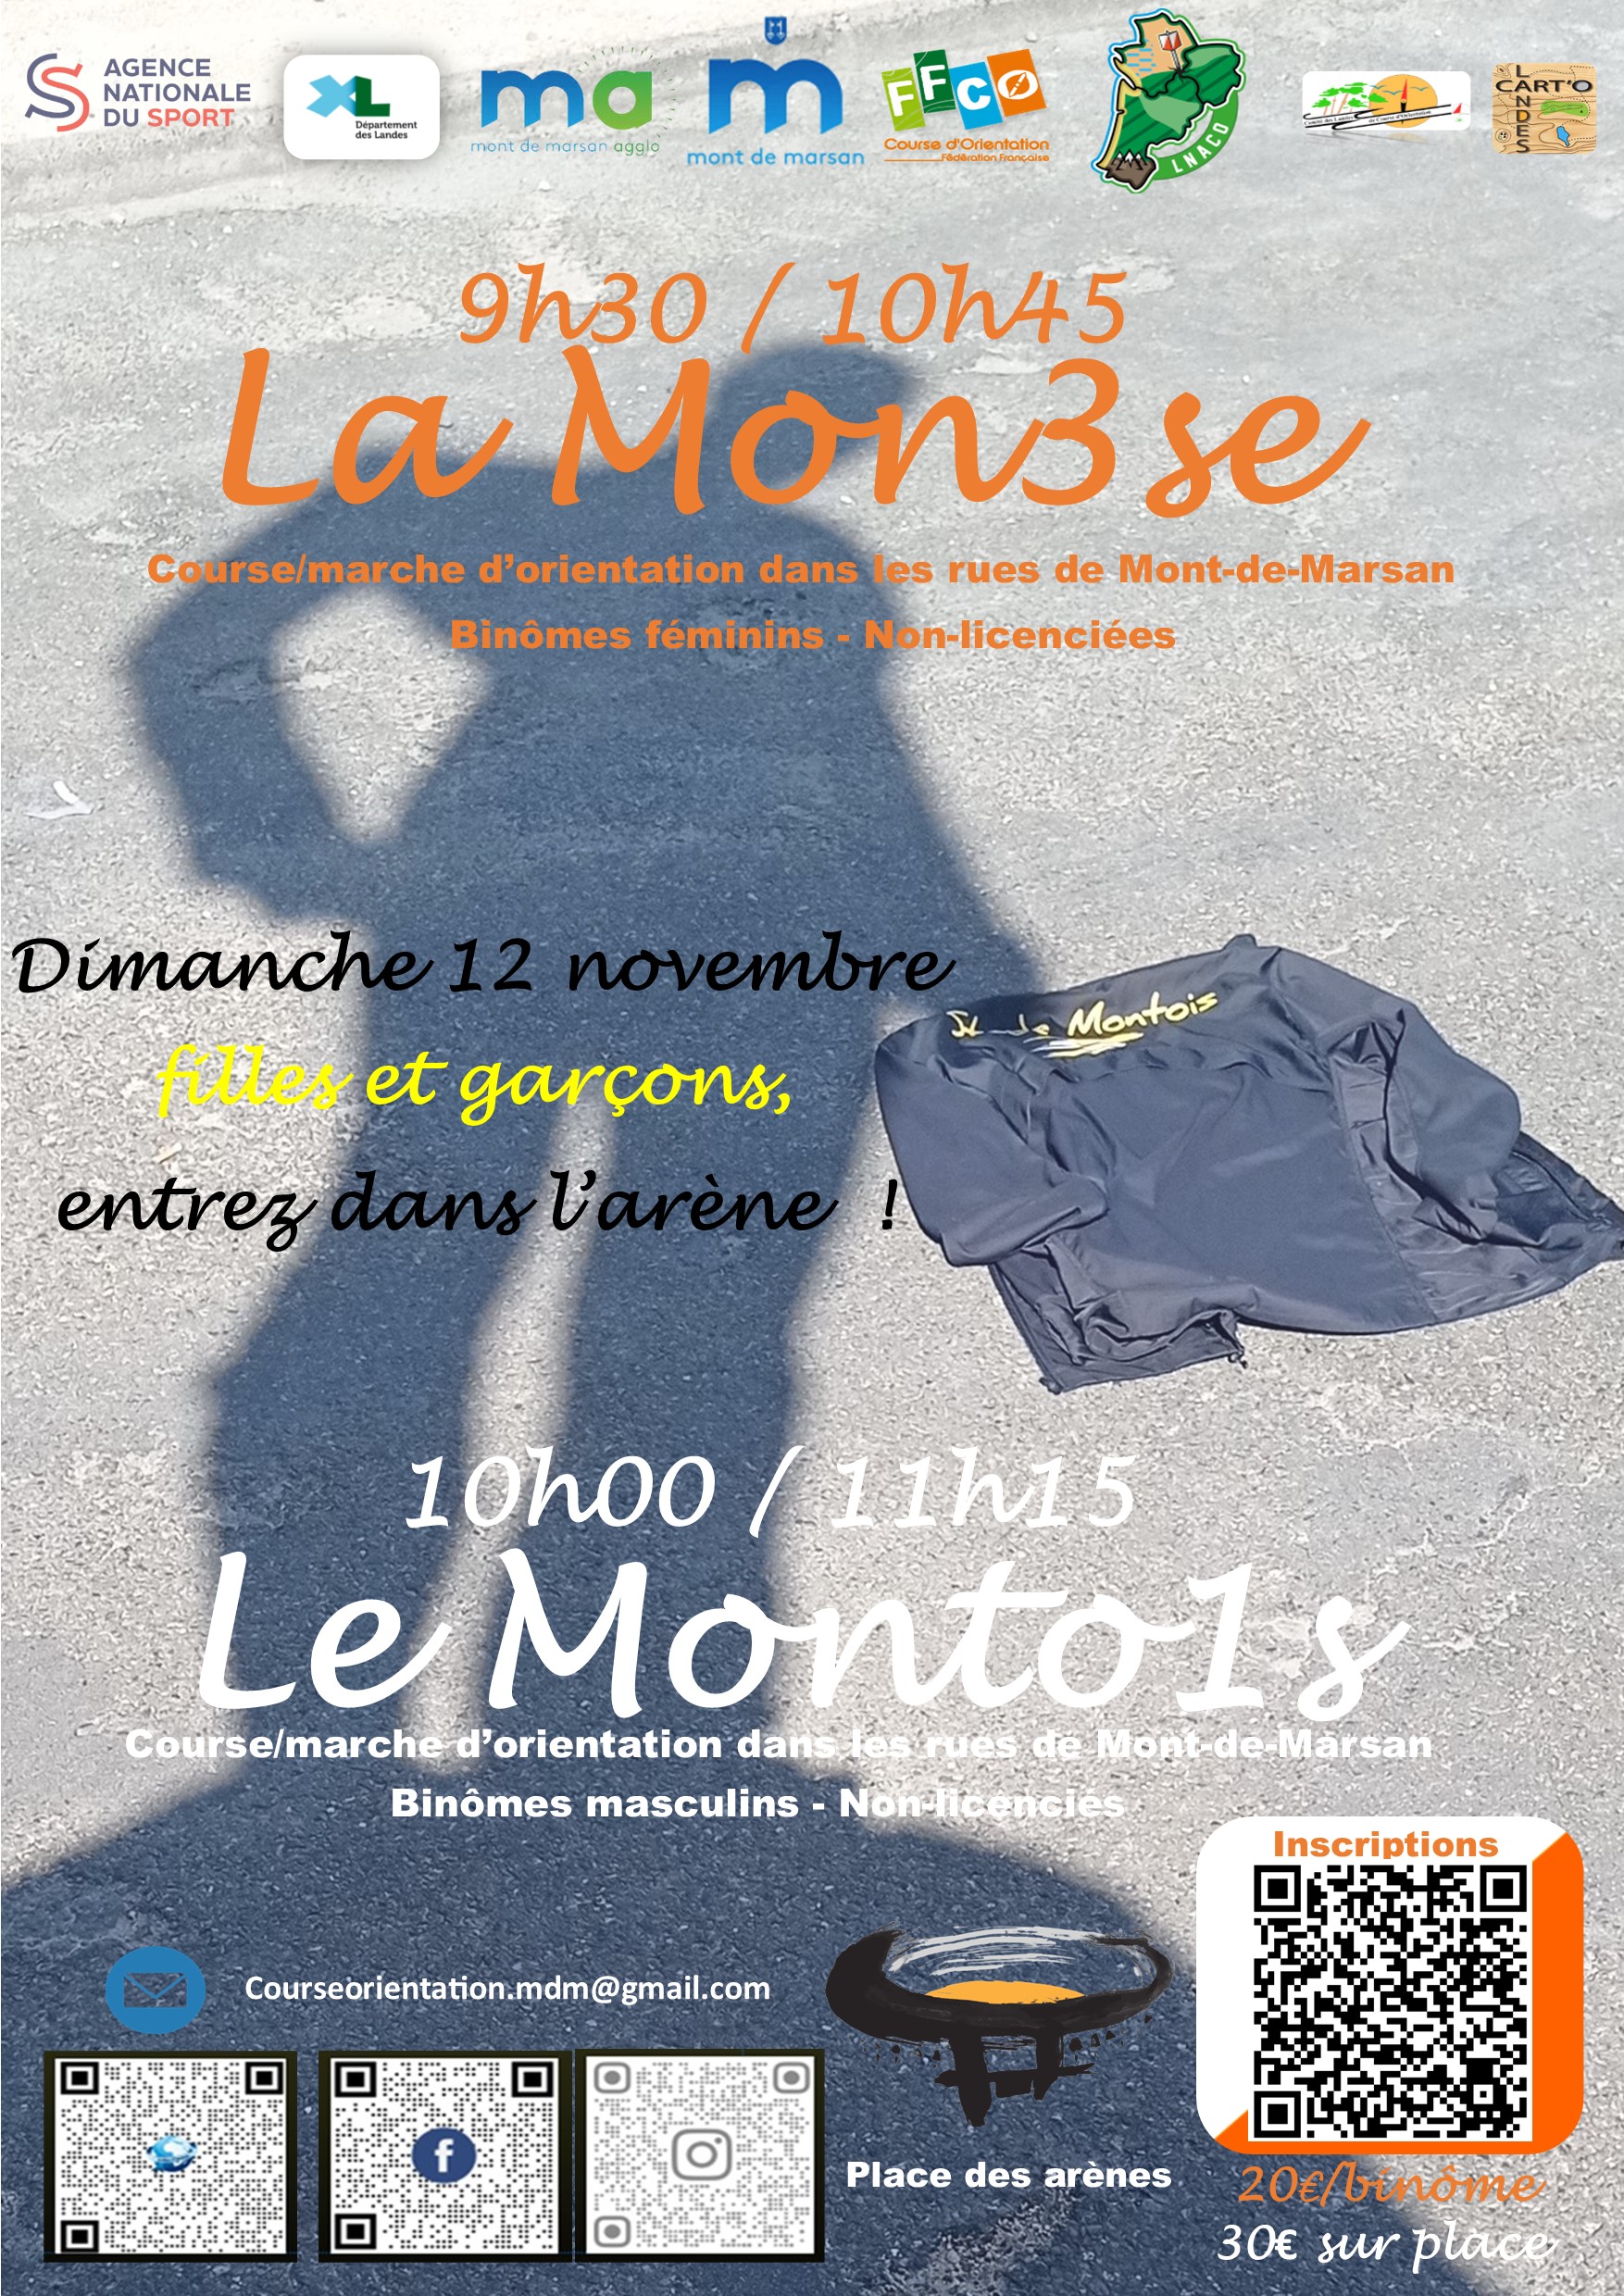 You are currently viewing La Mon3se / Le Monto1s